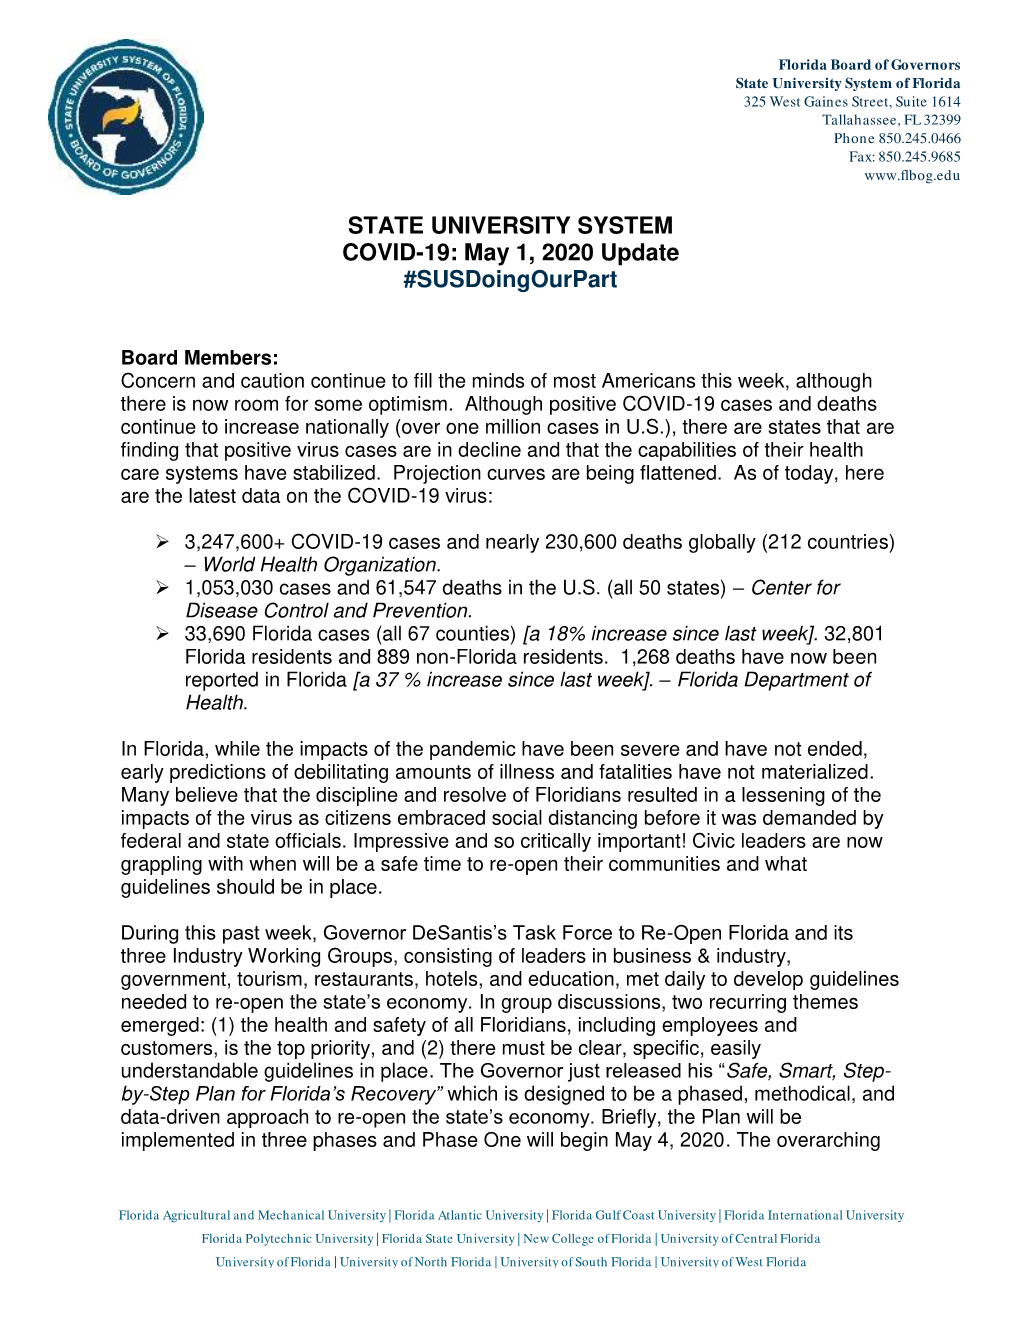 STATE UNIVERSITY SYSTEM COVID-19: May 1, 2020 Update #Susdoingourpart